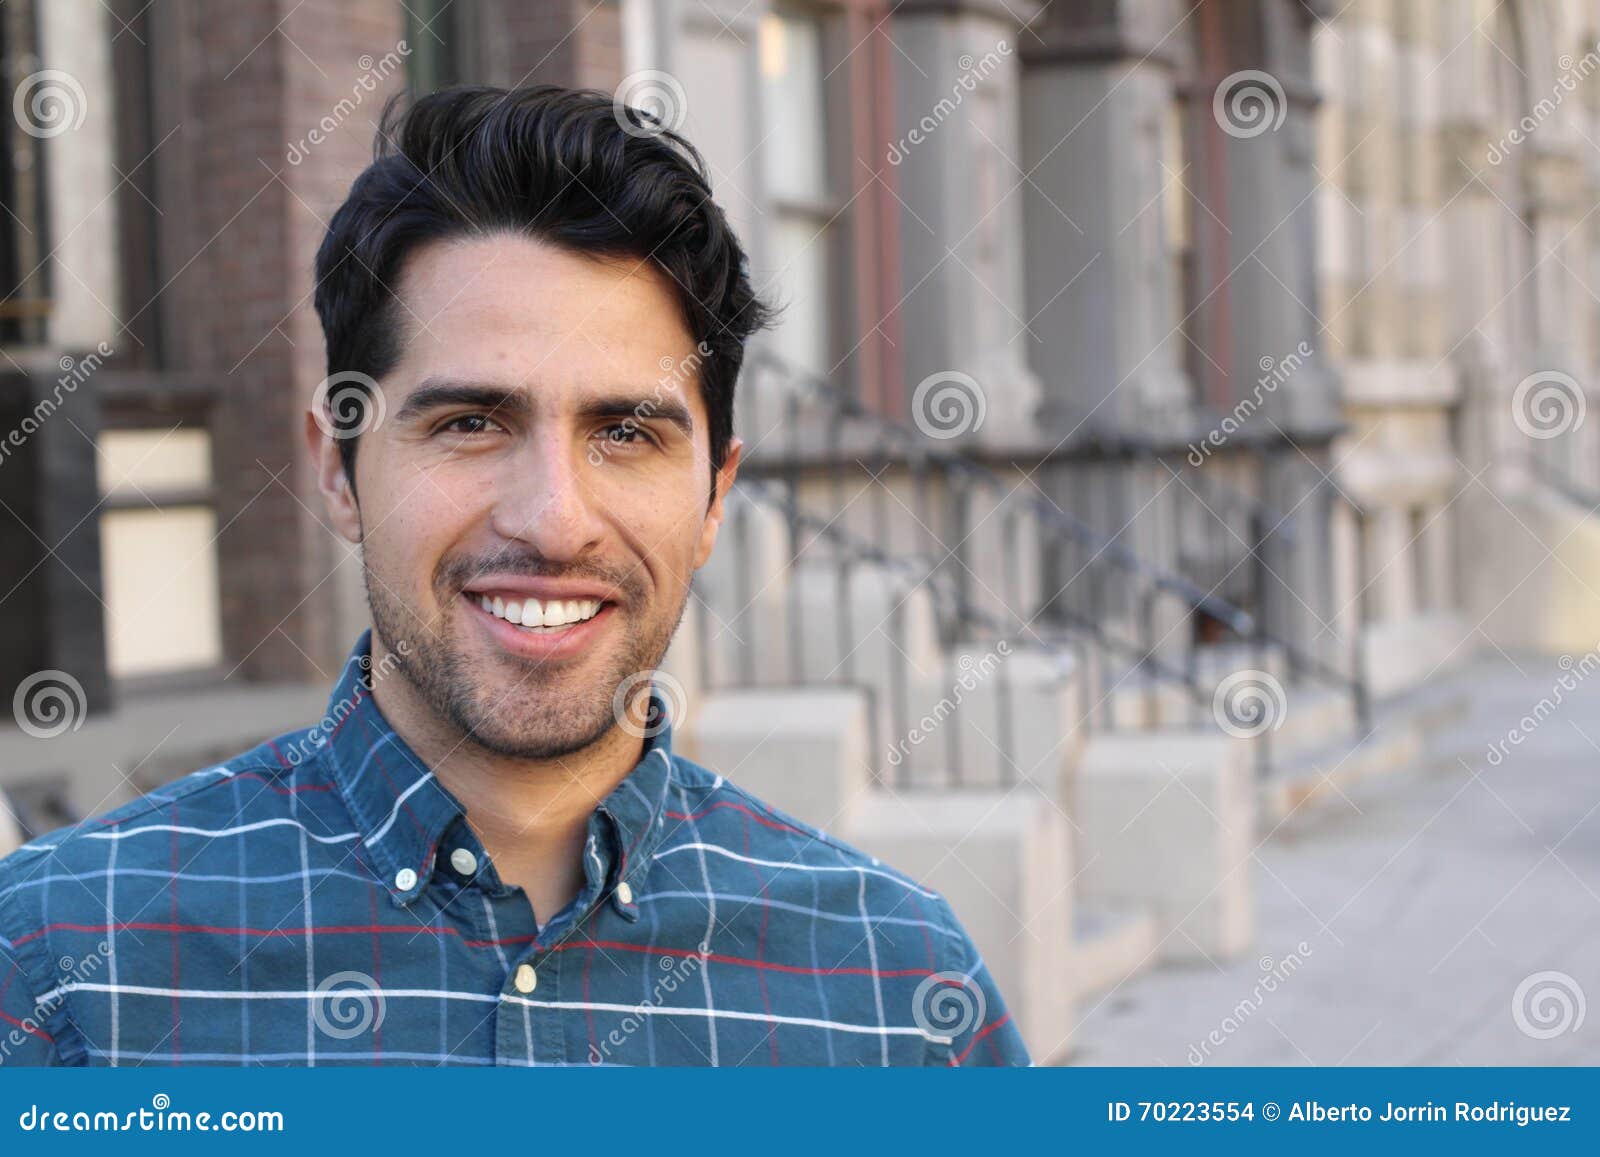 young and attractive latino male smiling in the city